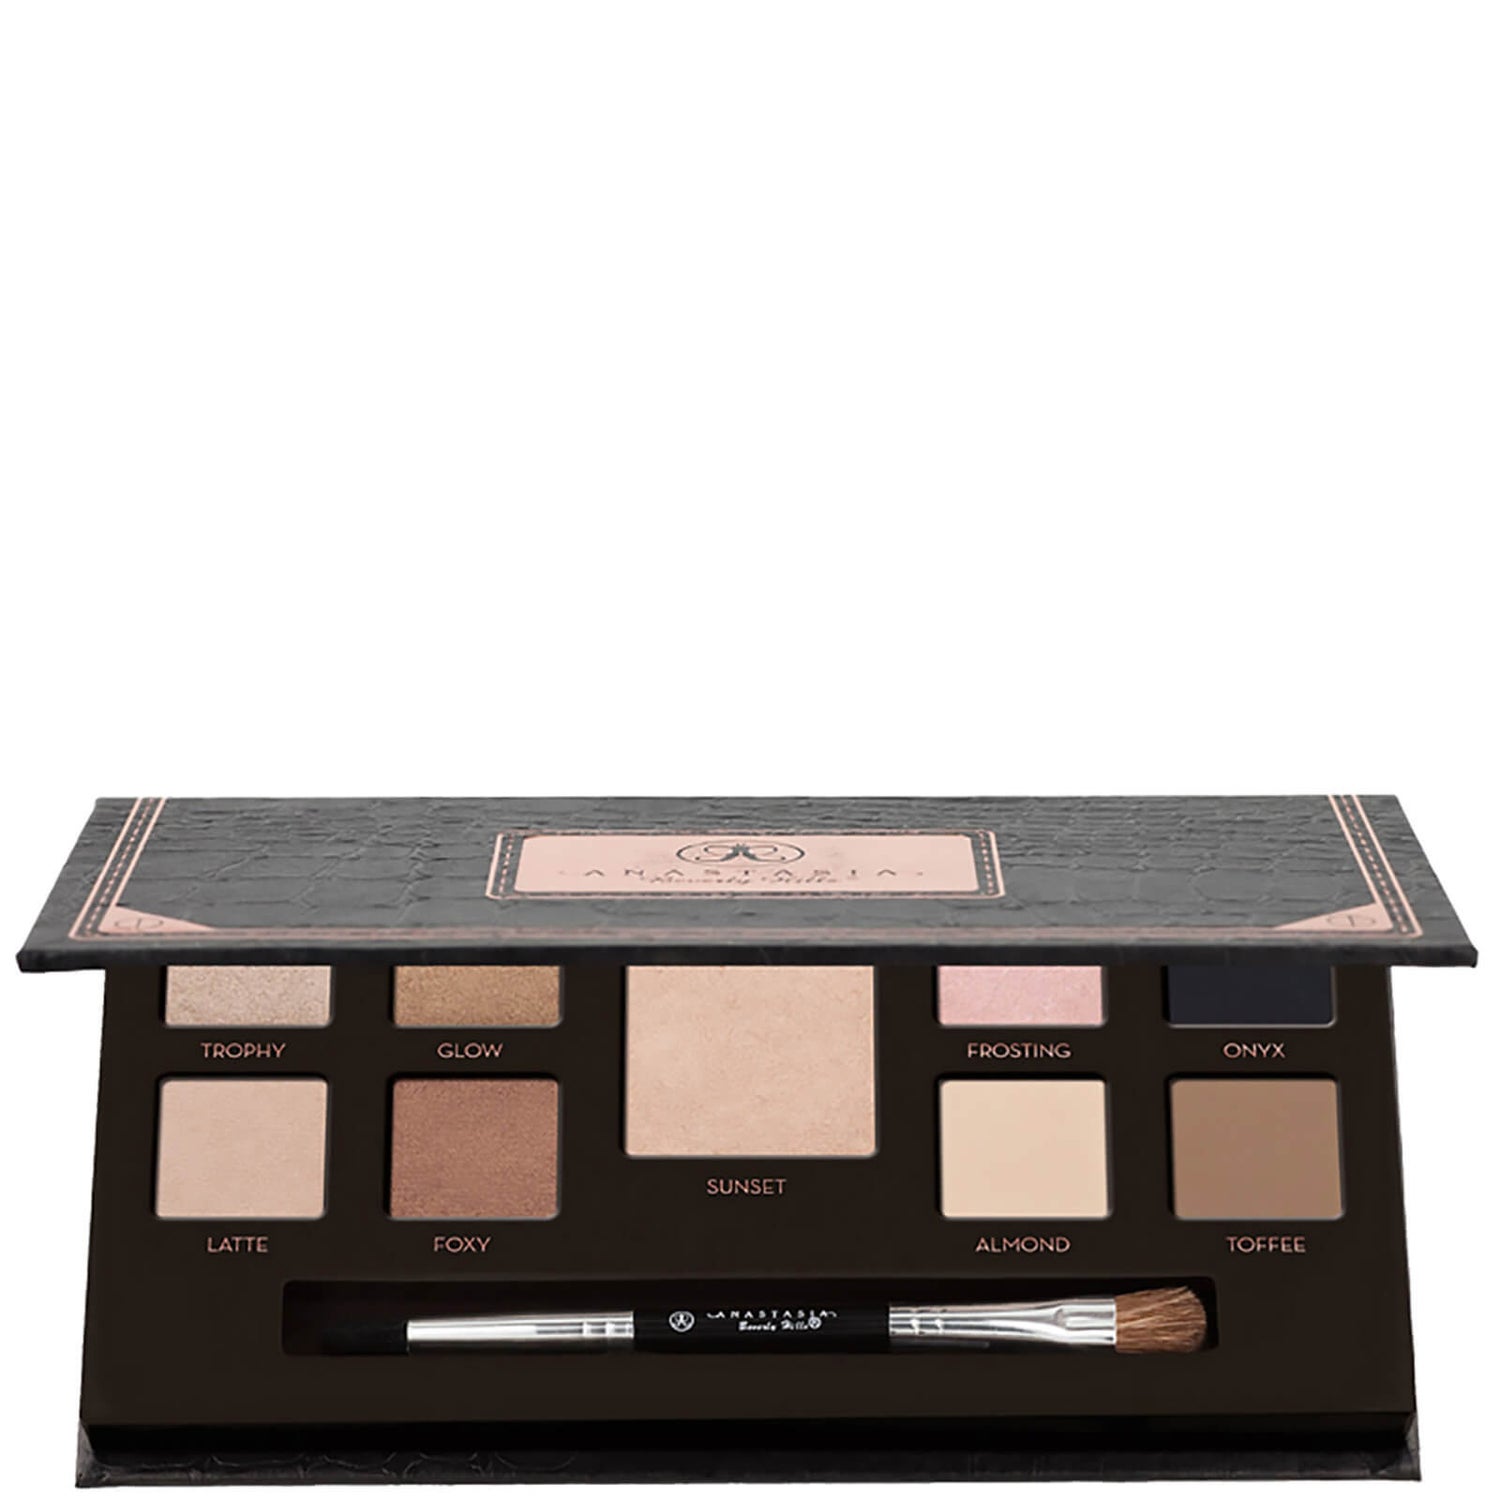 Anastasia Beverly Hills She Wears it Well Palette